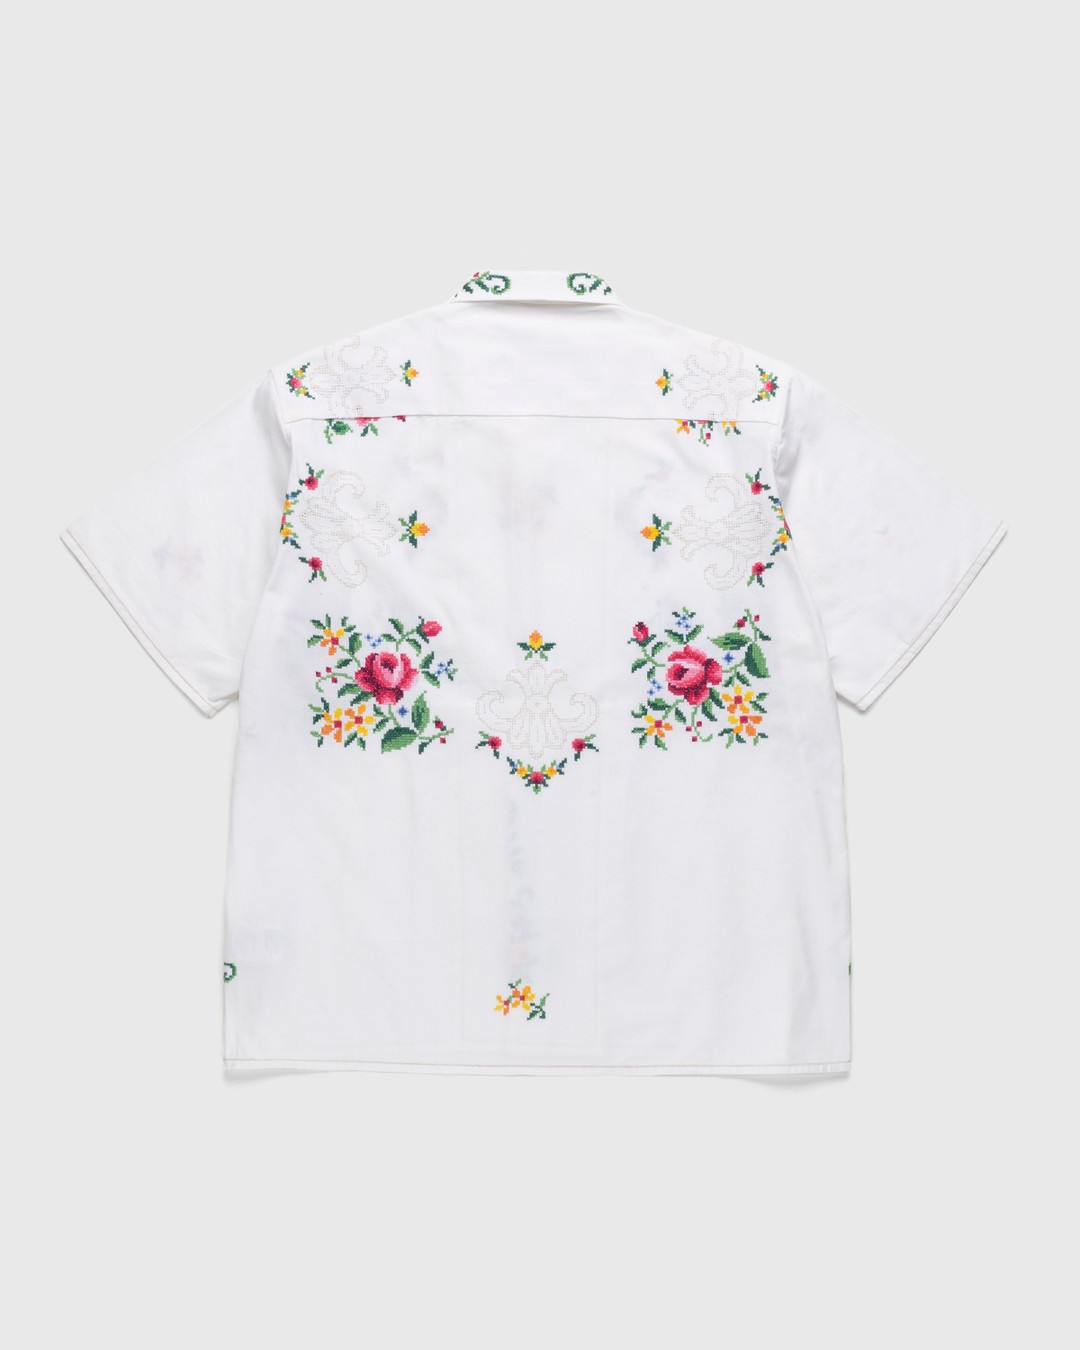 Diomene by Damir Doma – Embroidered Vacation Shirt White/Green - Shortsleeve Shirts - White - Image 2